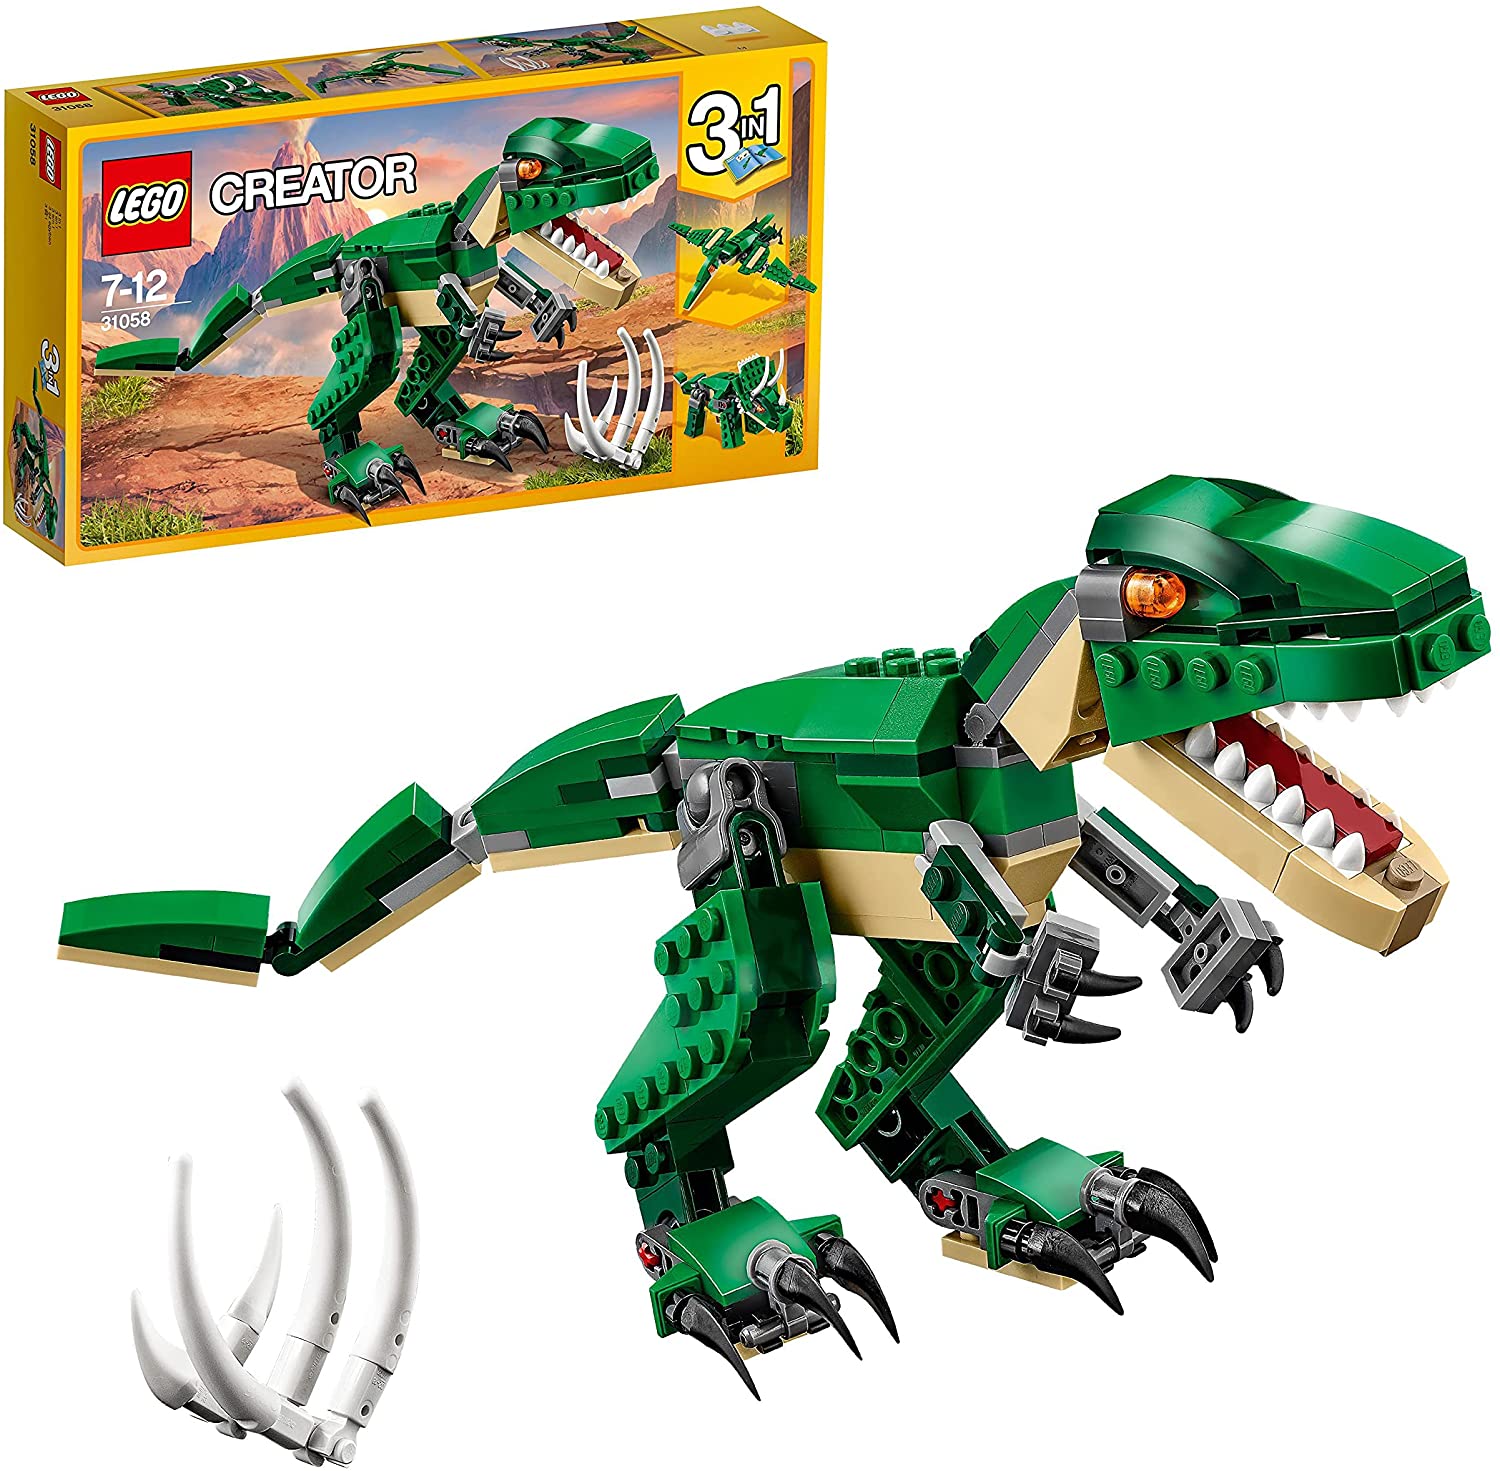 LEGO 31058 Creator Dinosaurier, 3-in-1 Modell T-Rex, Triceratops, Pterodactylus